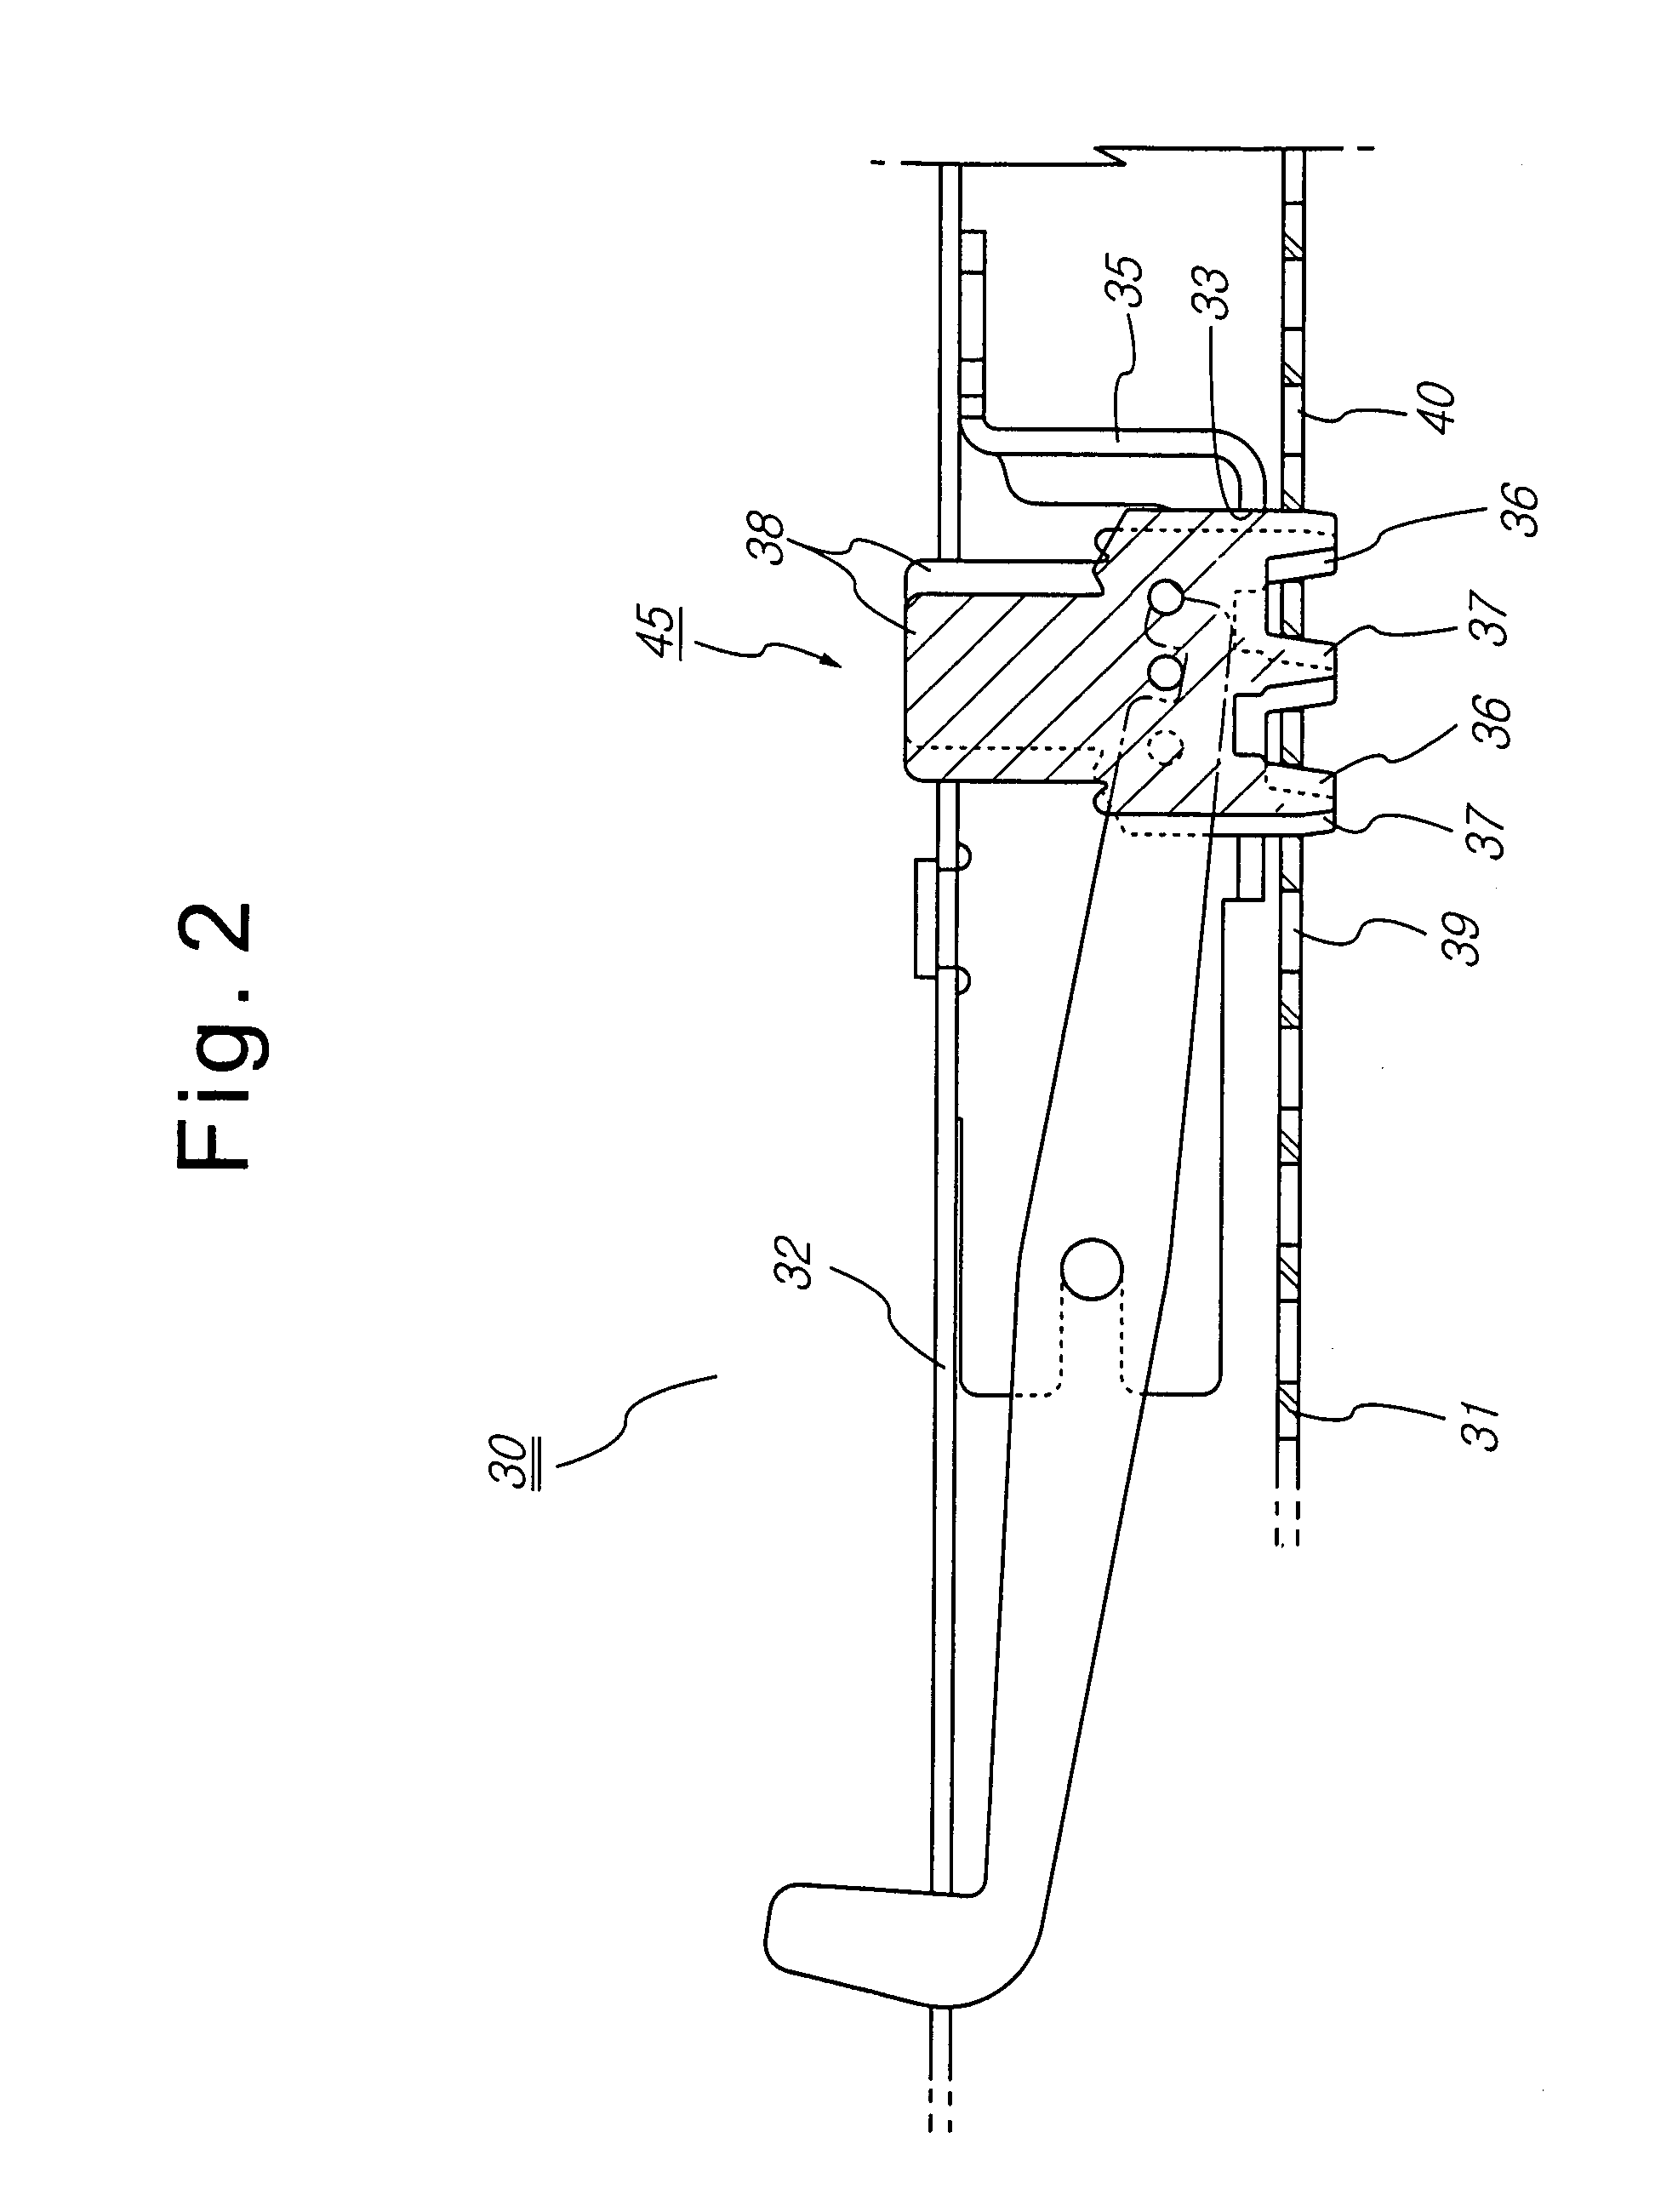 Locking guide of seat locking device for vehicle